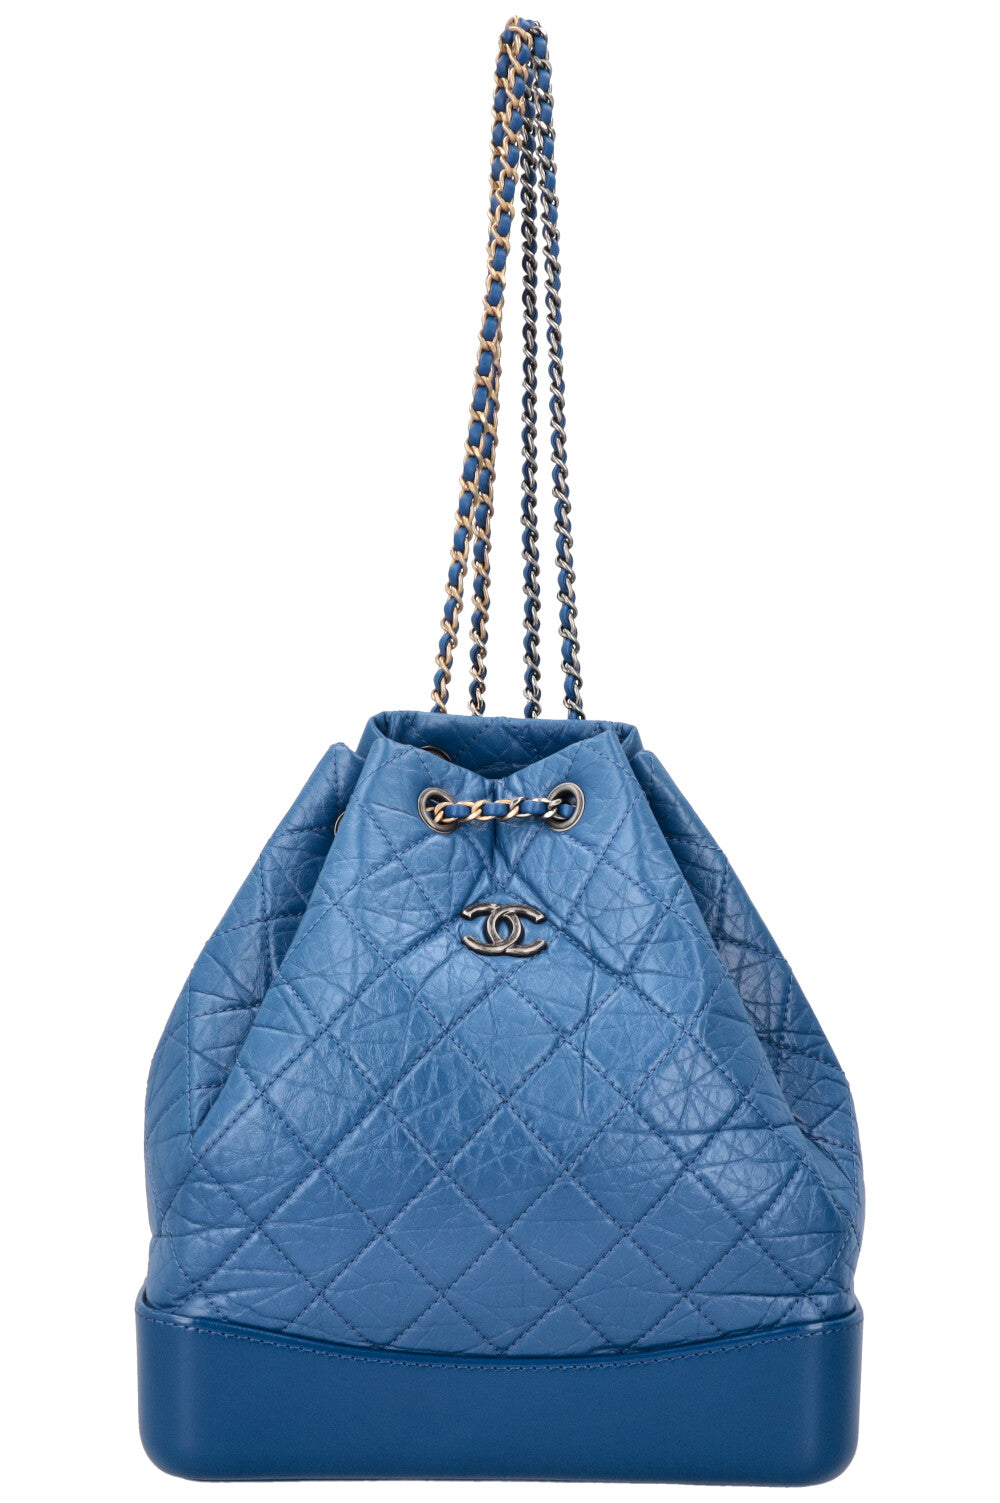 CHANEL Medium Gabrielle Quilted Backpack Blue